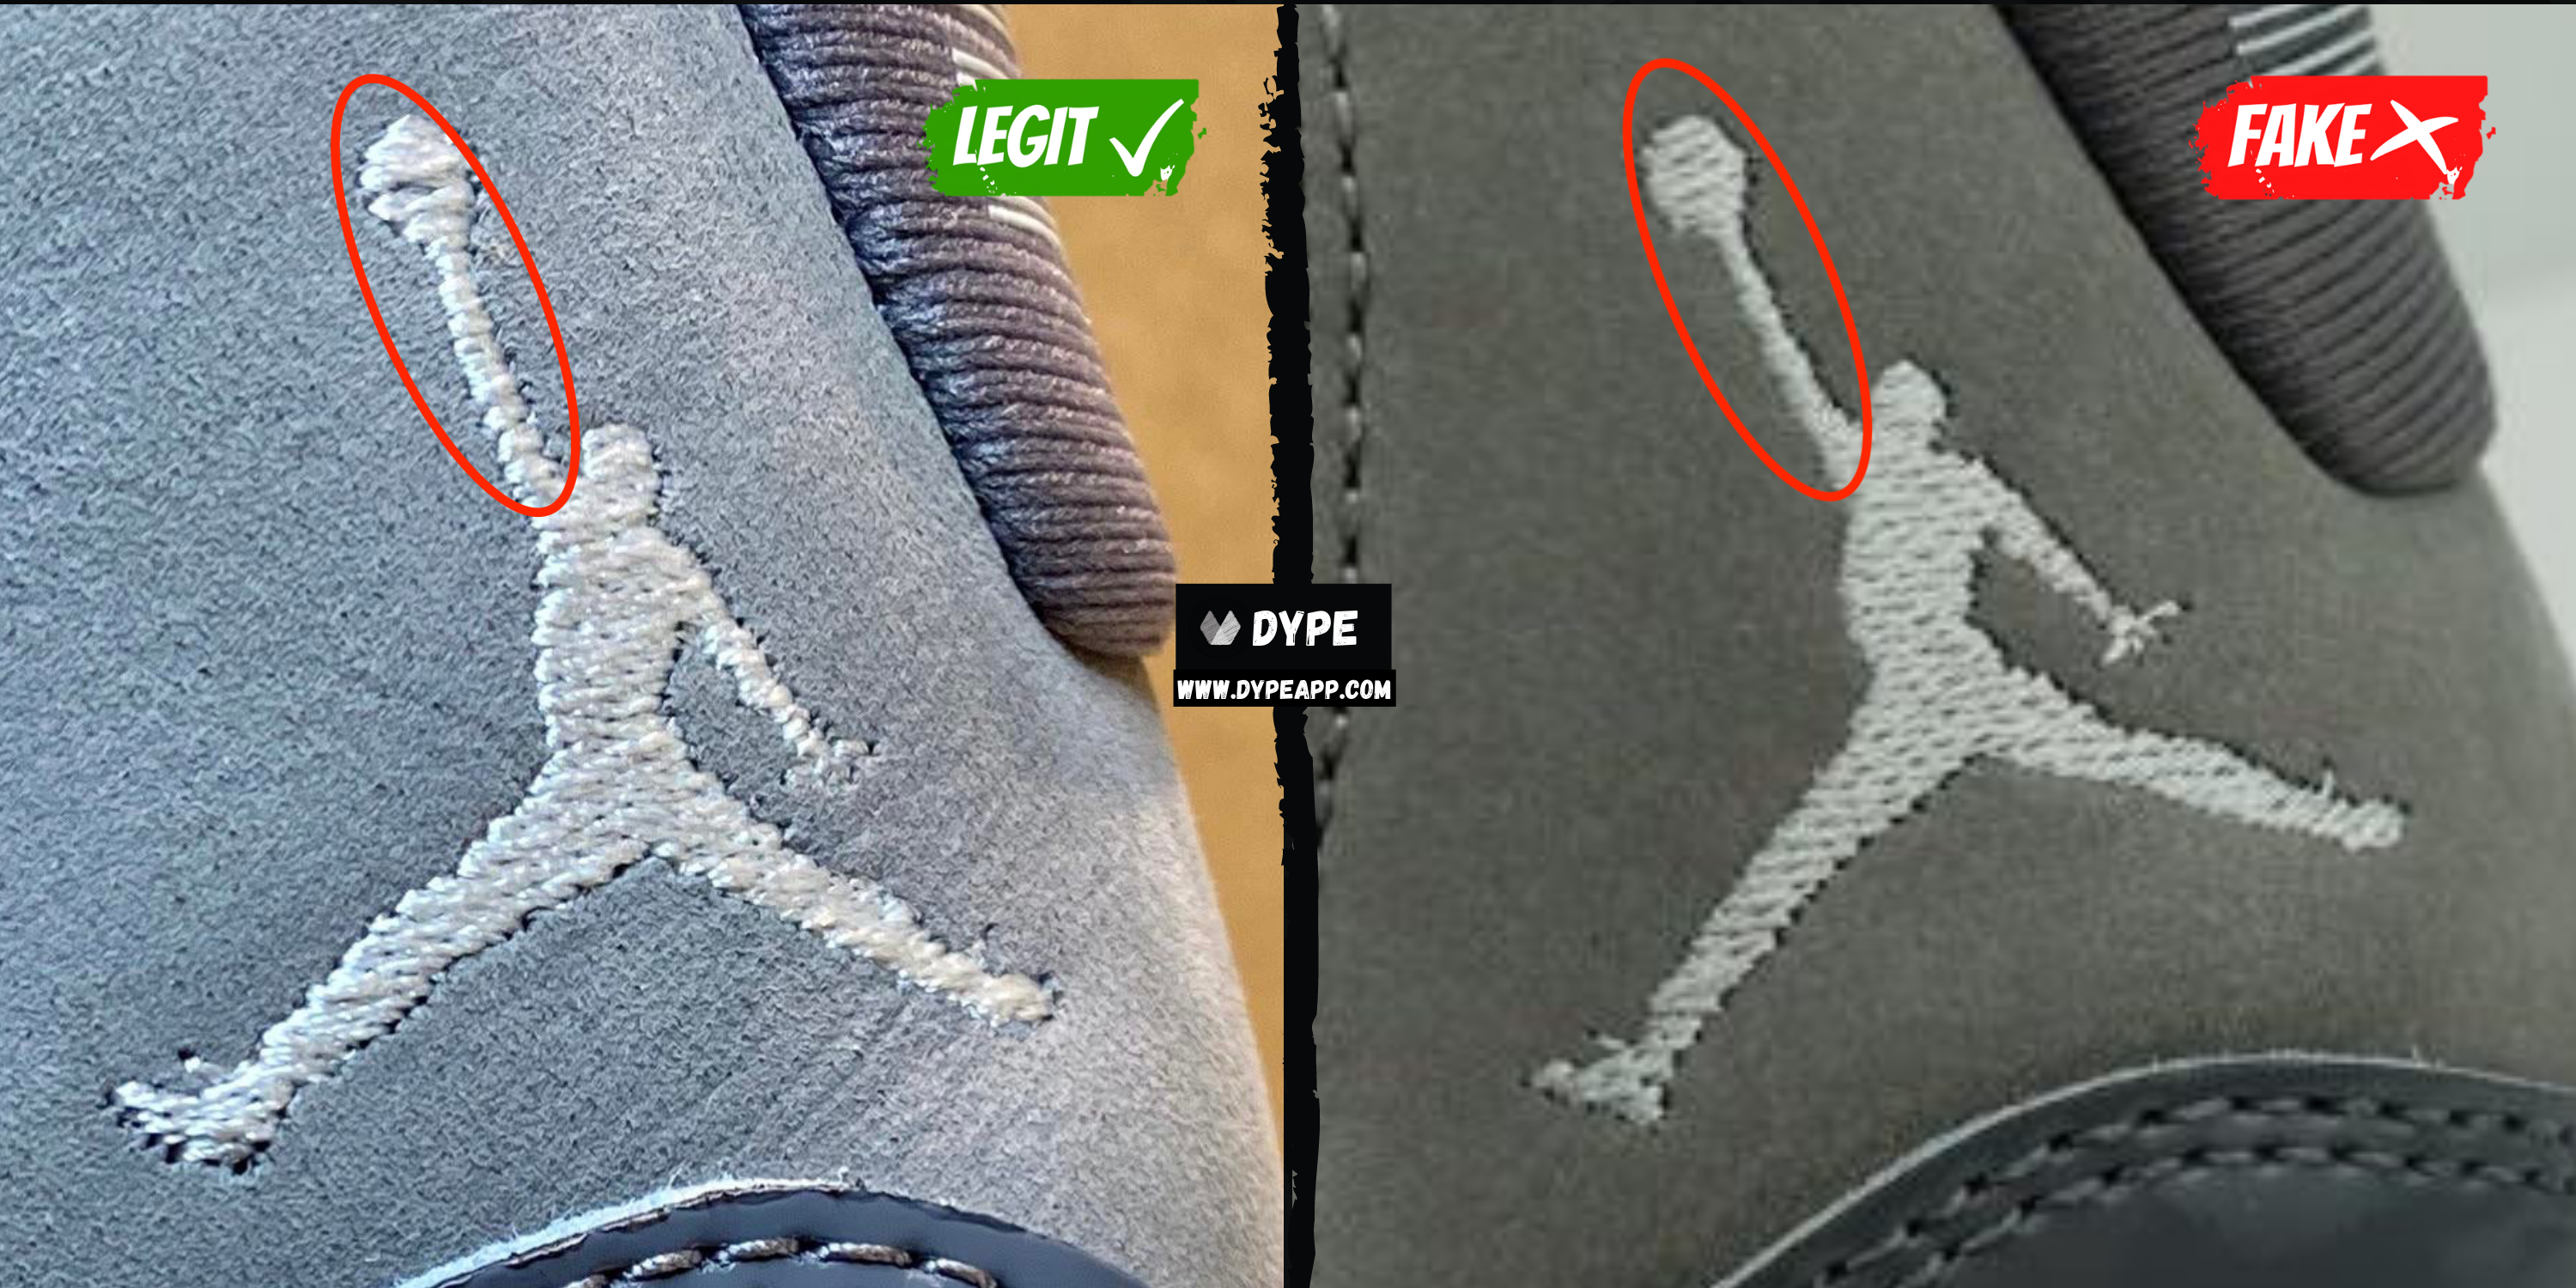 how can you tell if the jordan 11s are fake